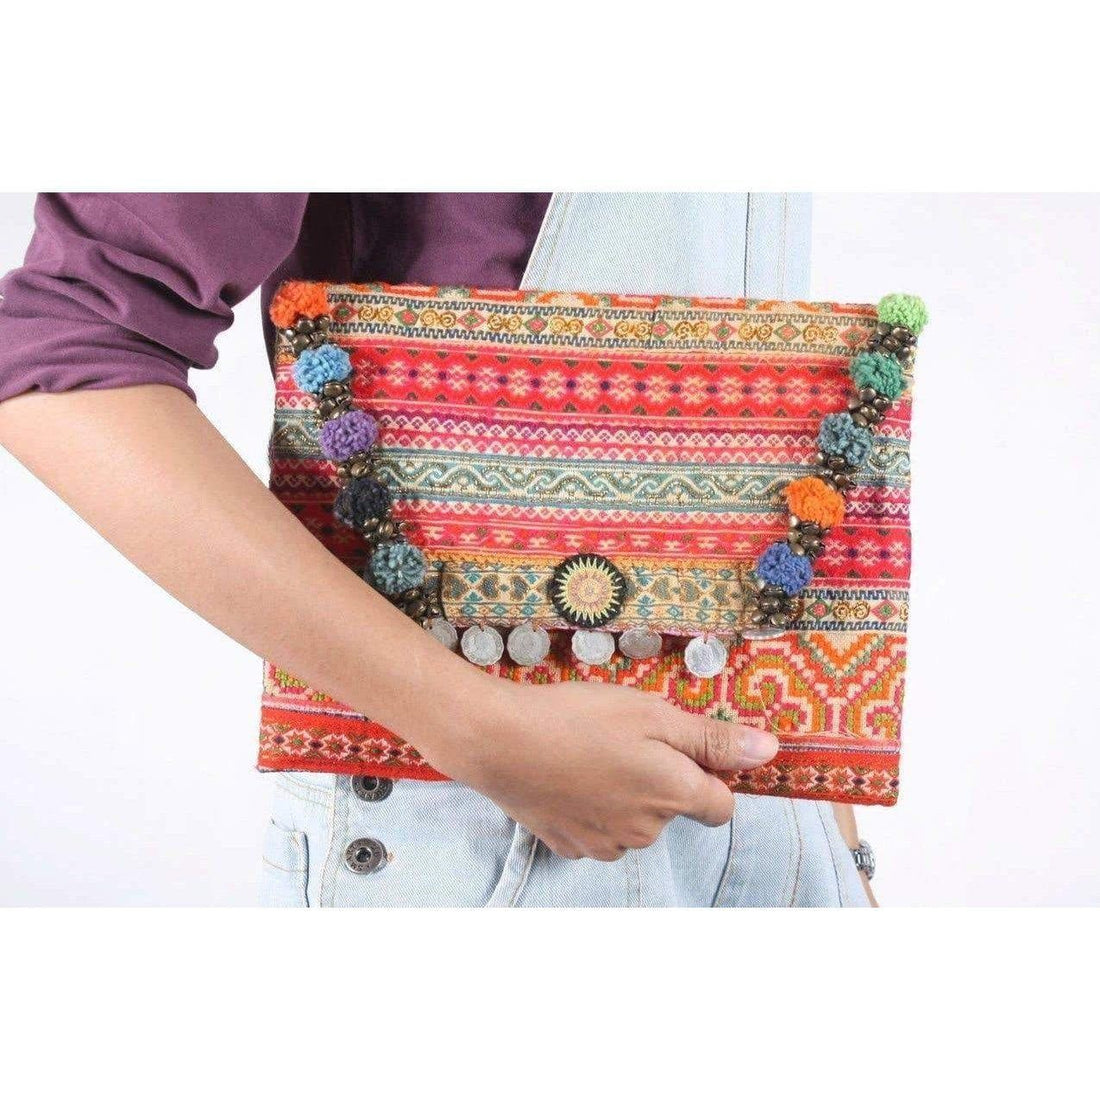 Wealth Vintage Hmong Fabric Clutch - Thailand